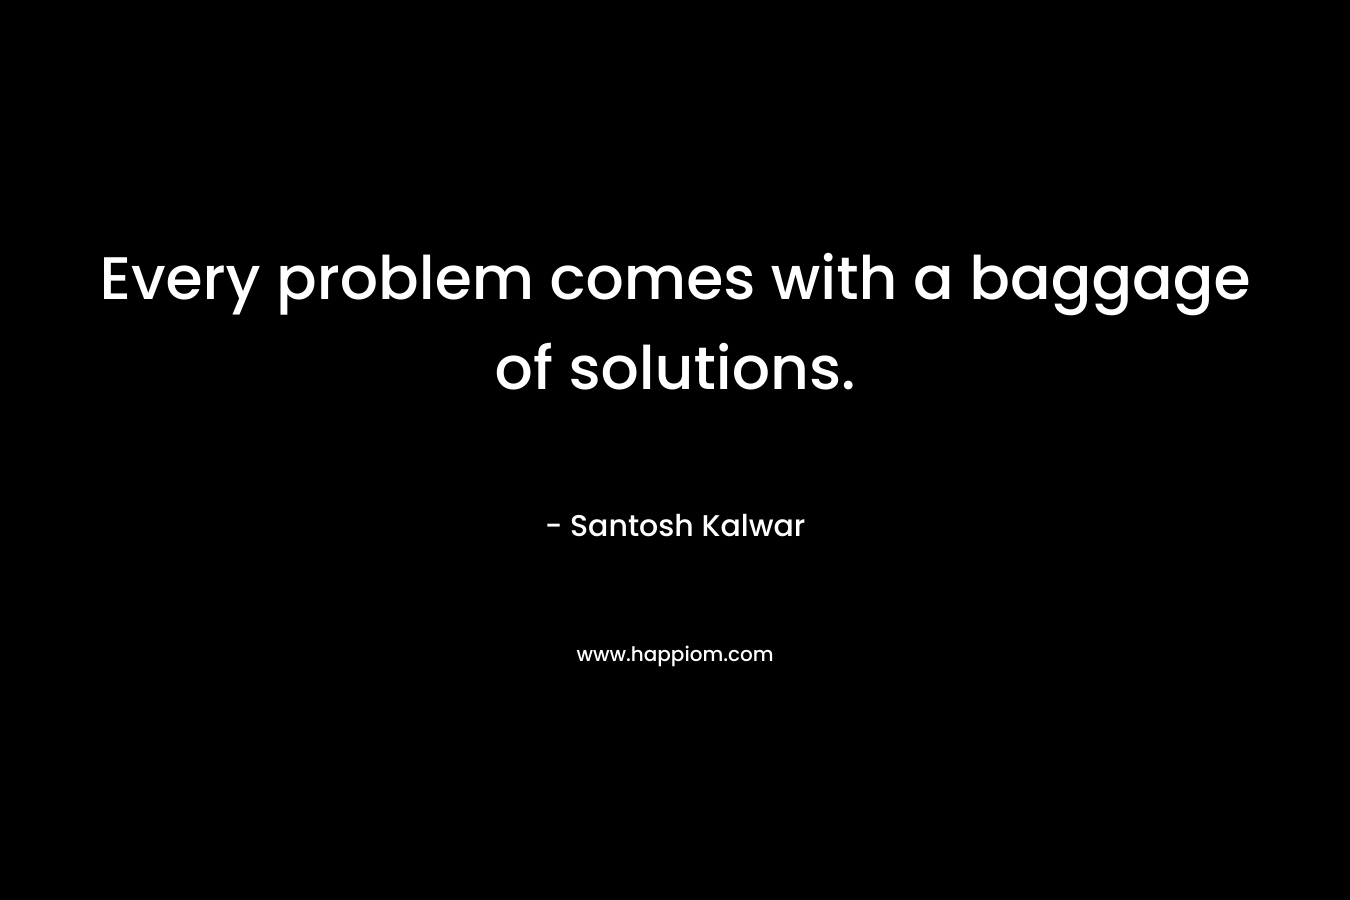 Every problem comes with a baggage of solutions.